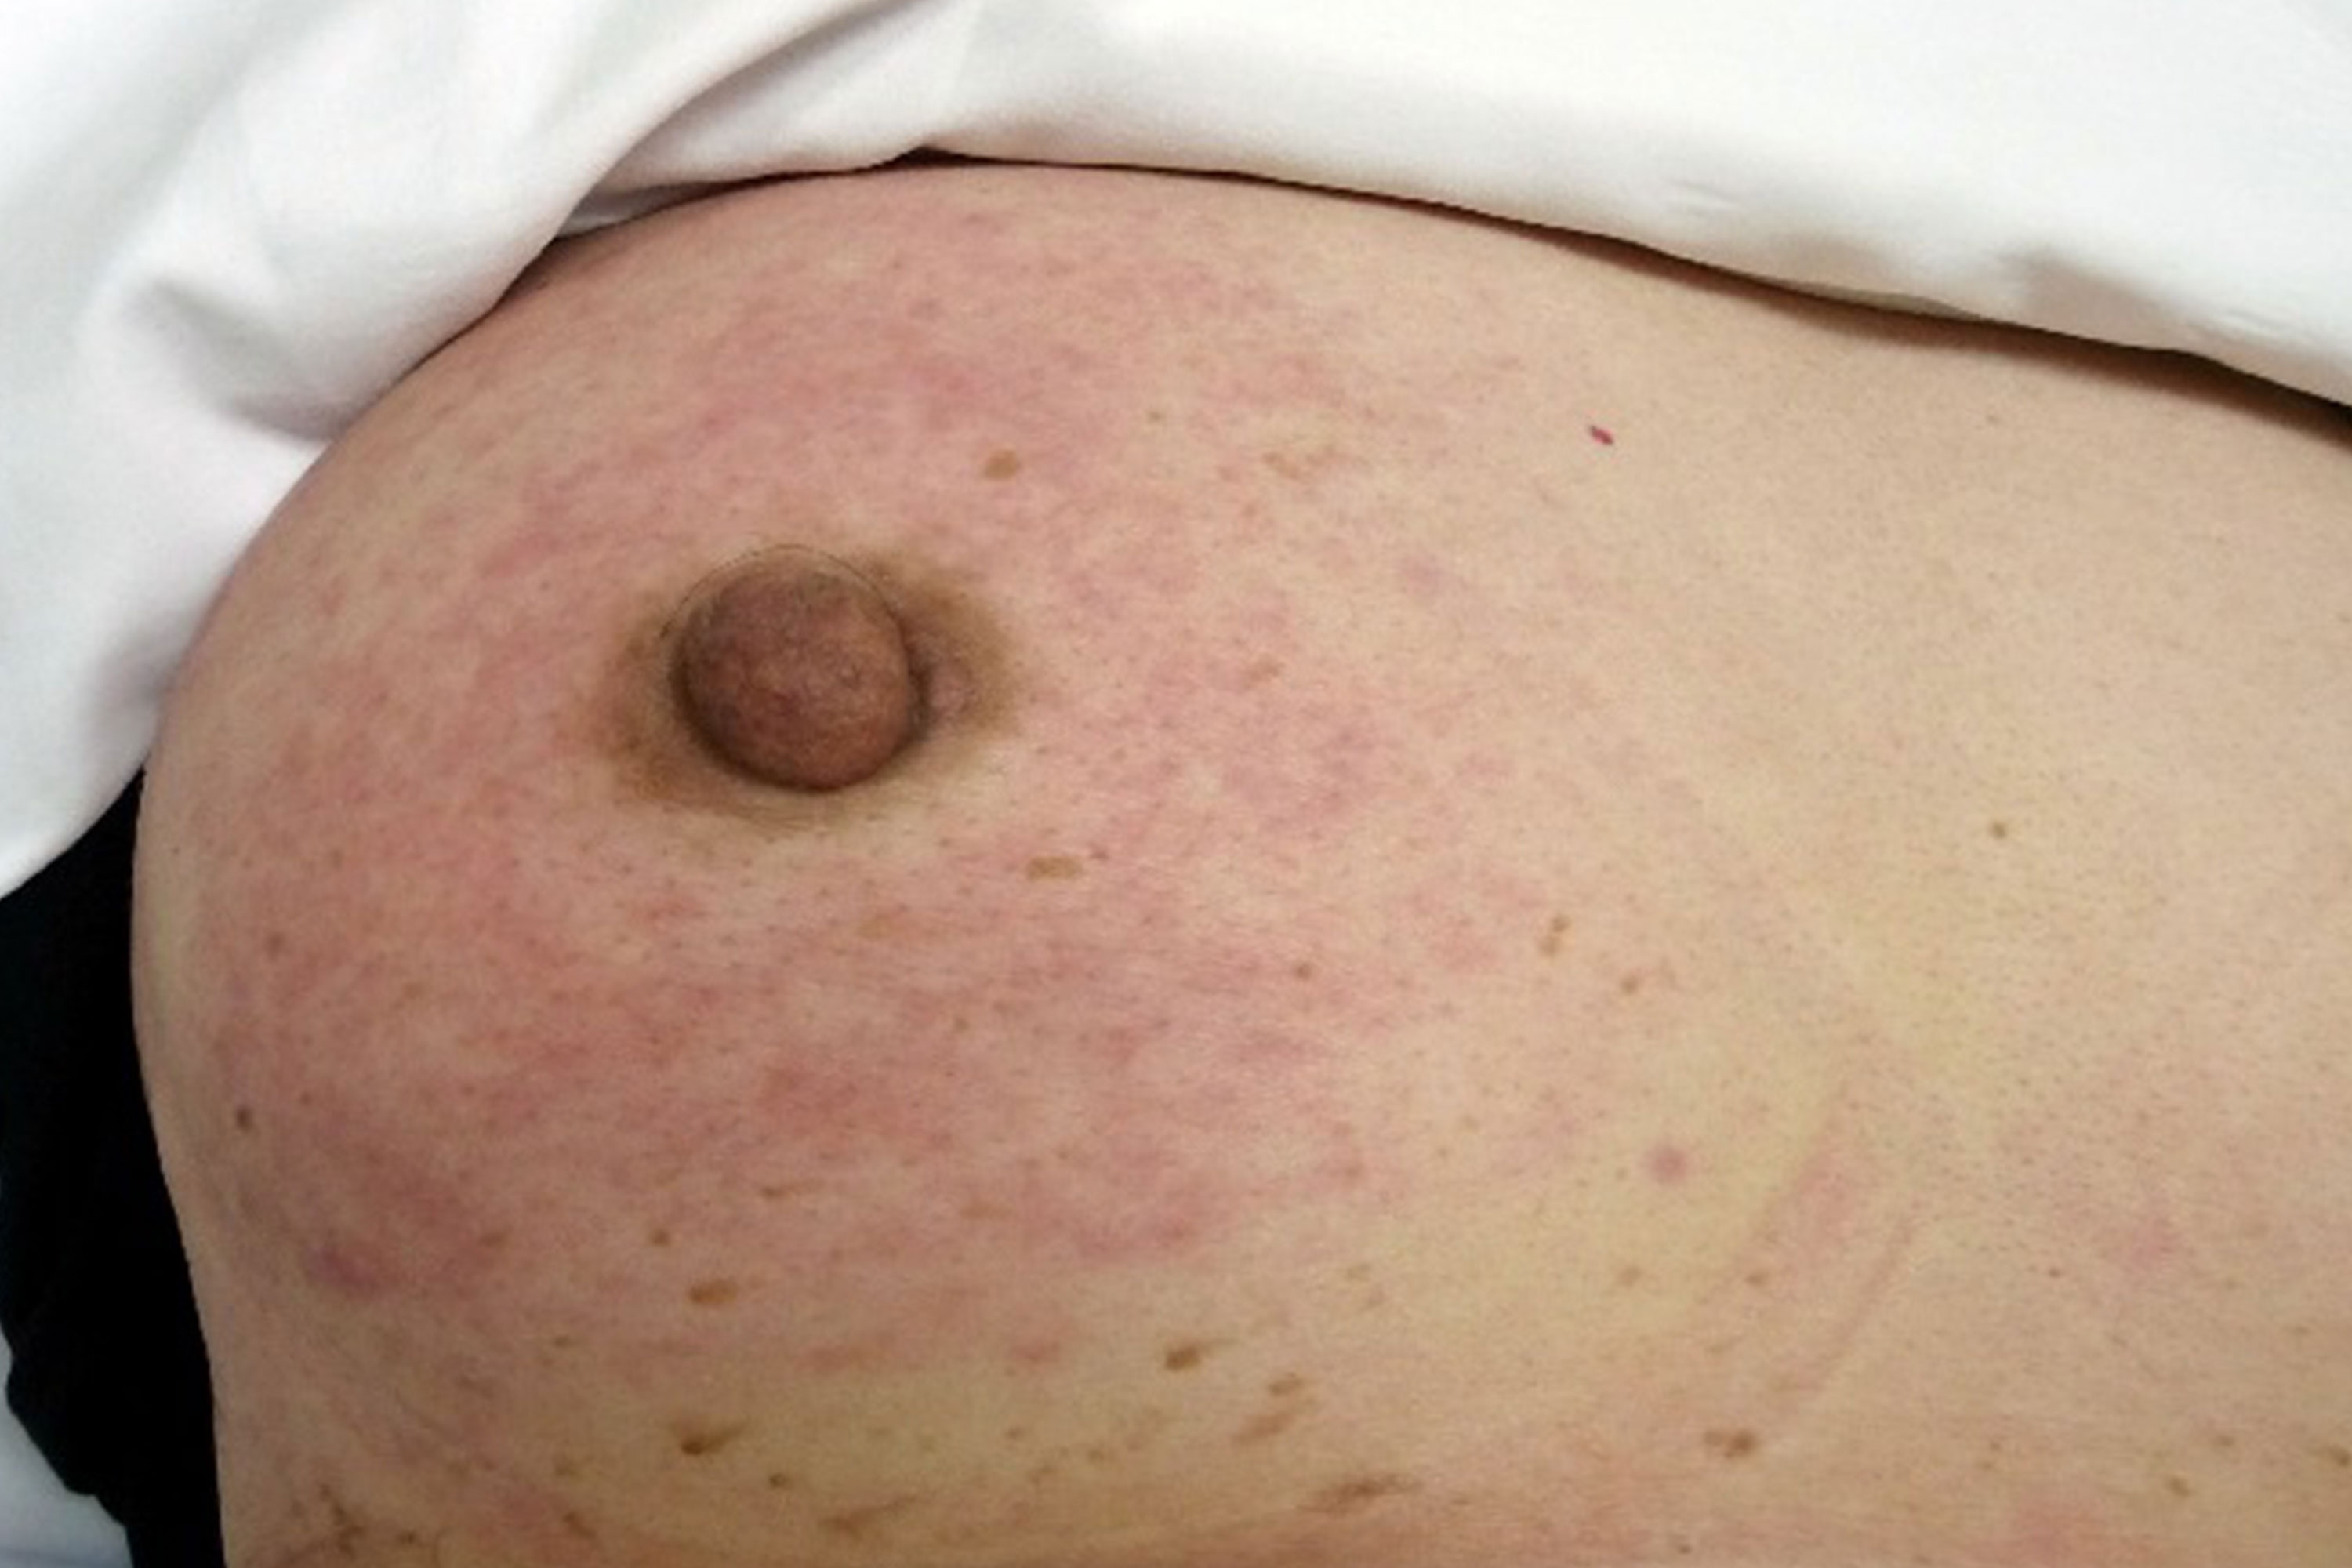 What Causes a Rash on the Breast?